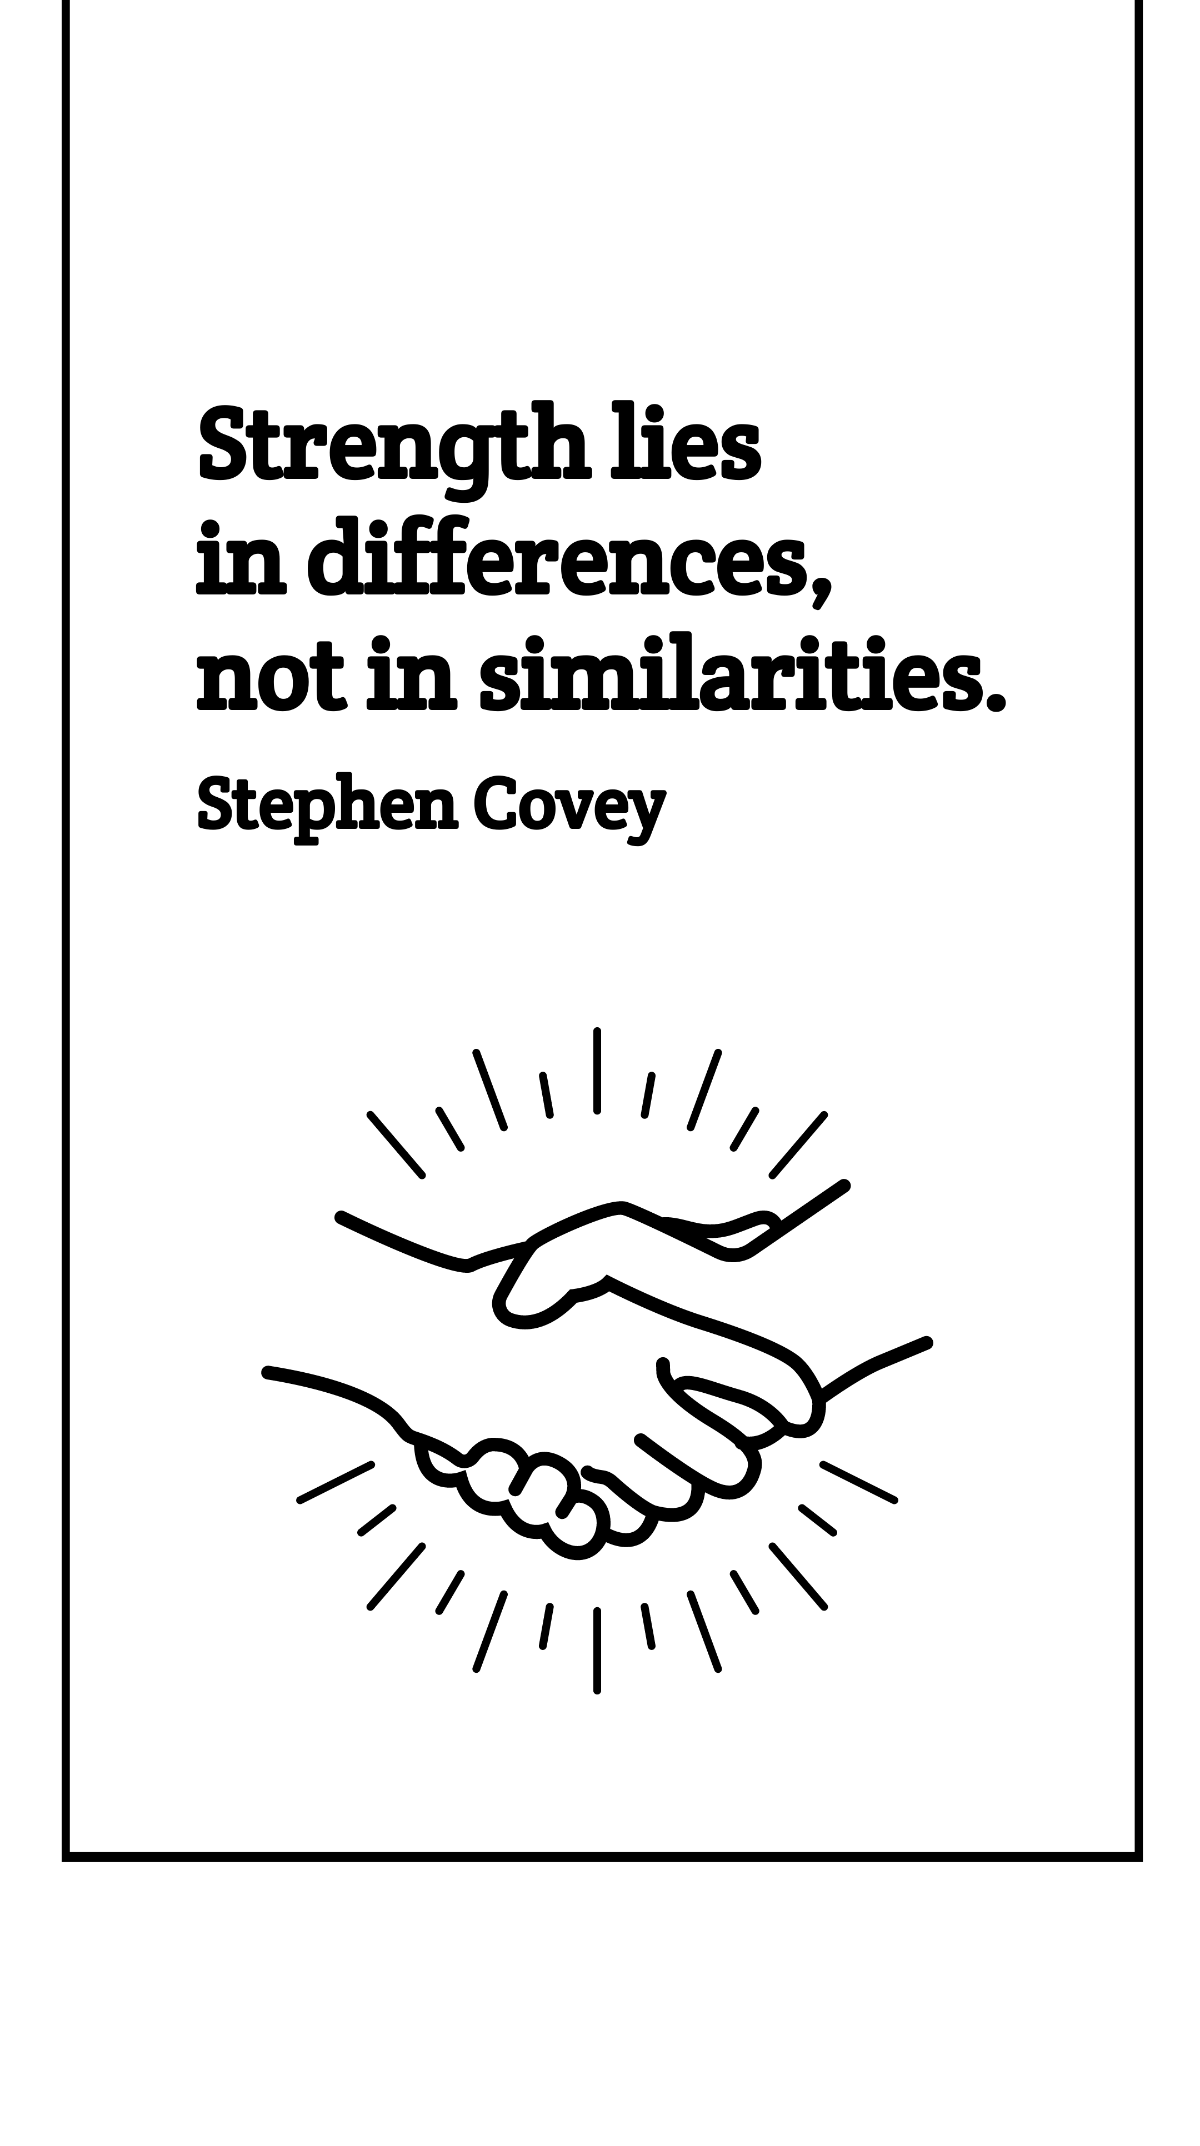 Stephen Covey - Strength lies in differences, not in similarities. Template